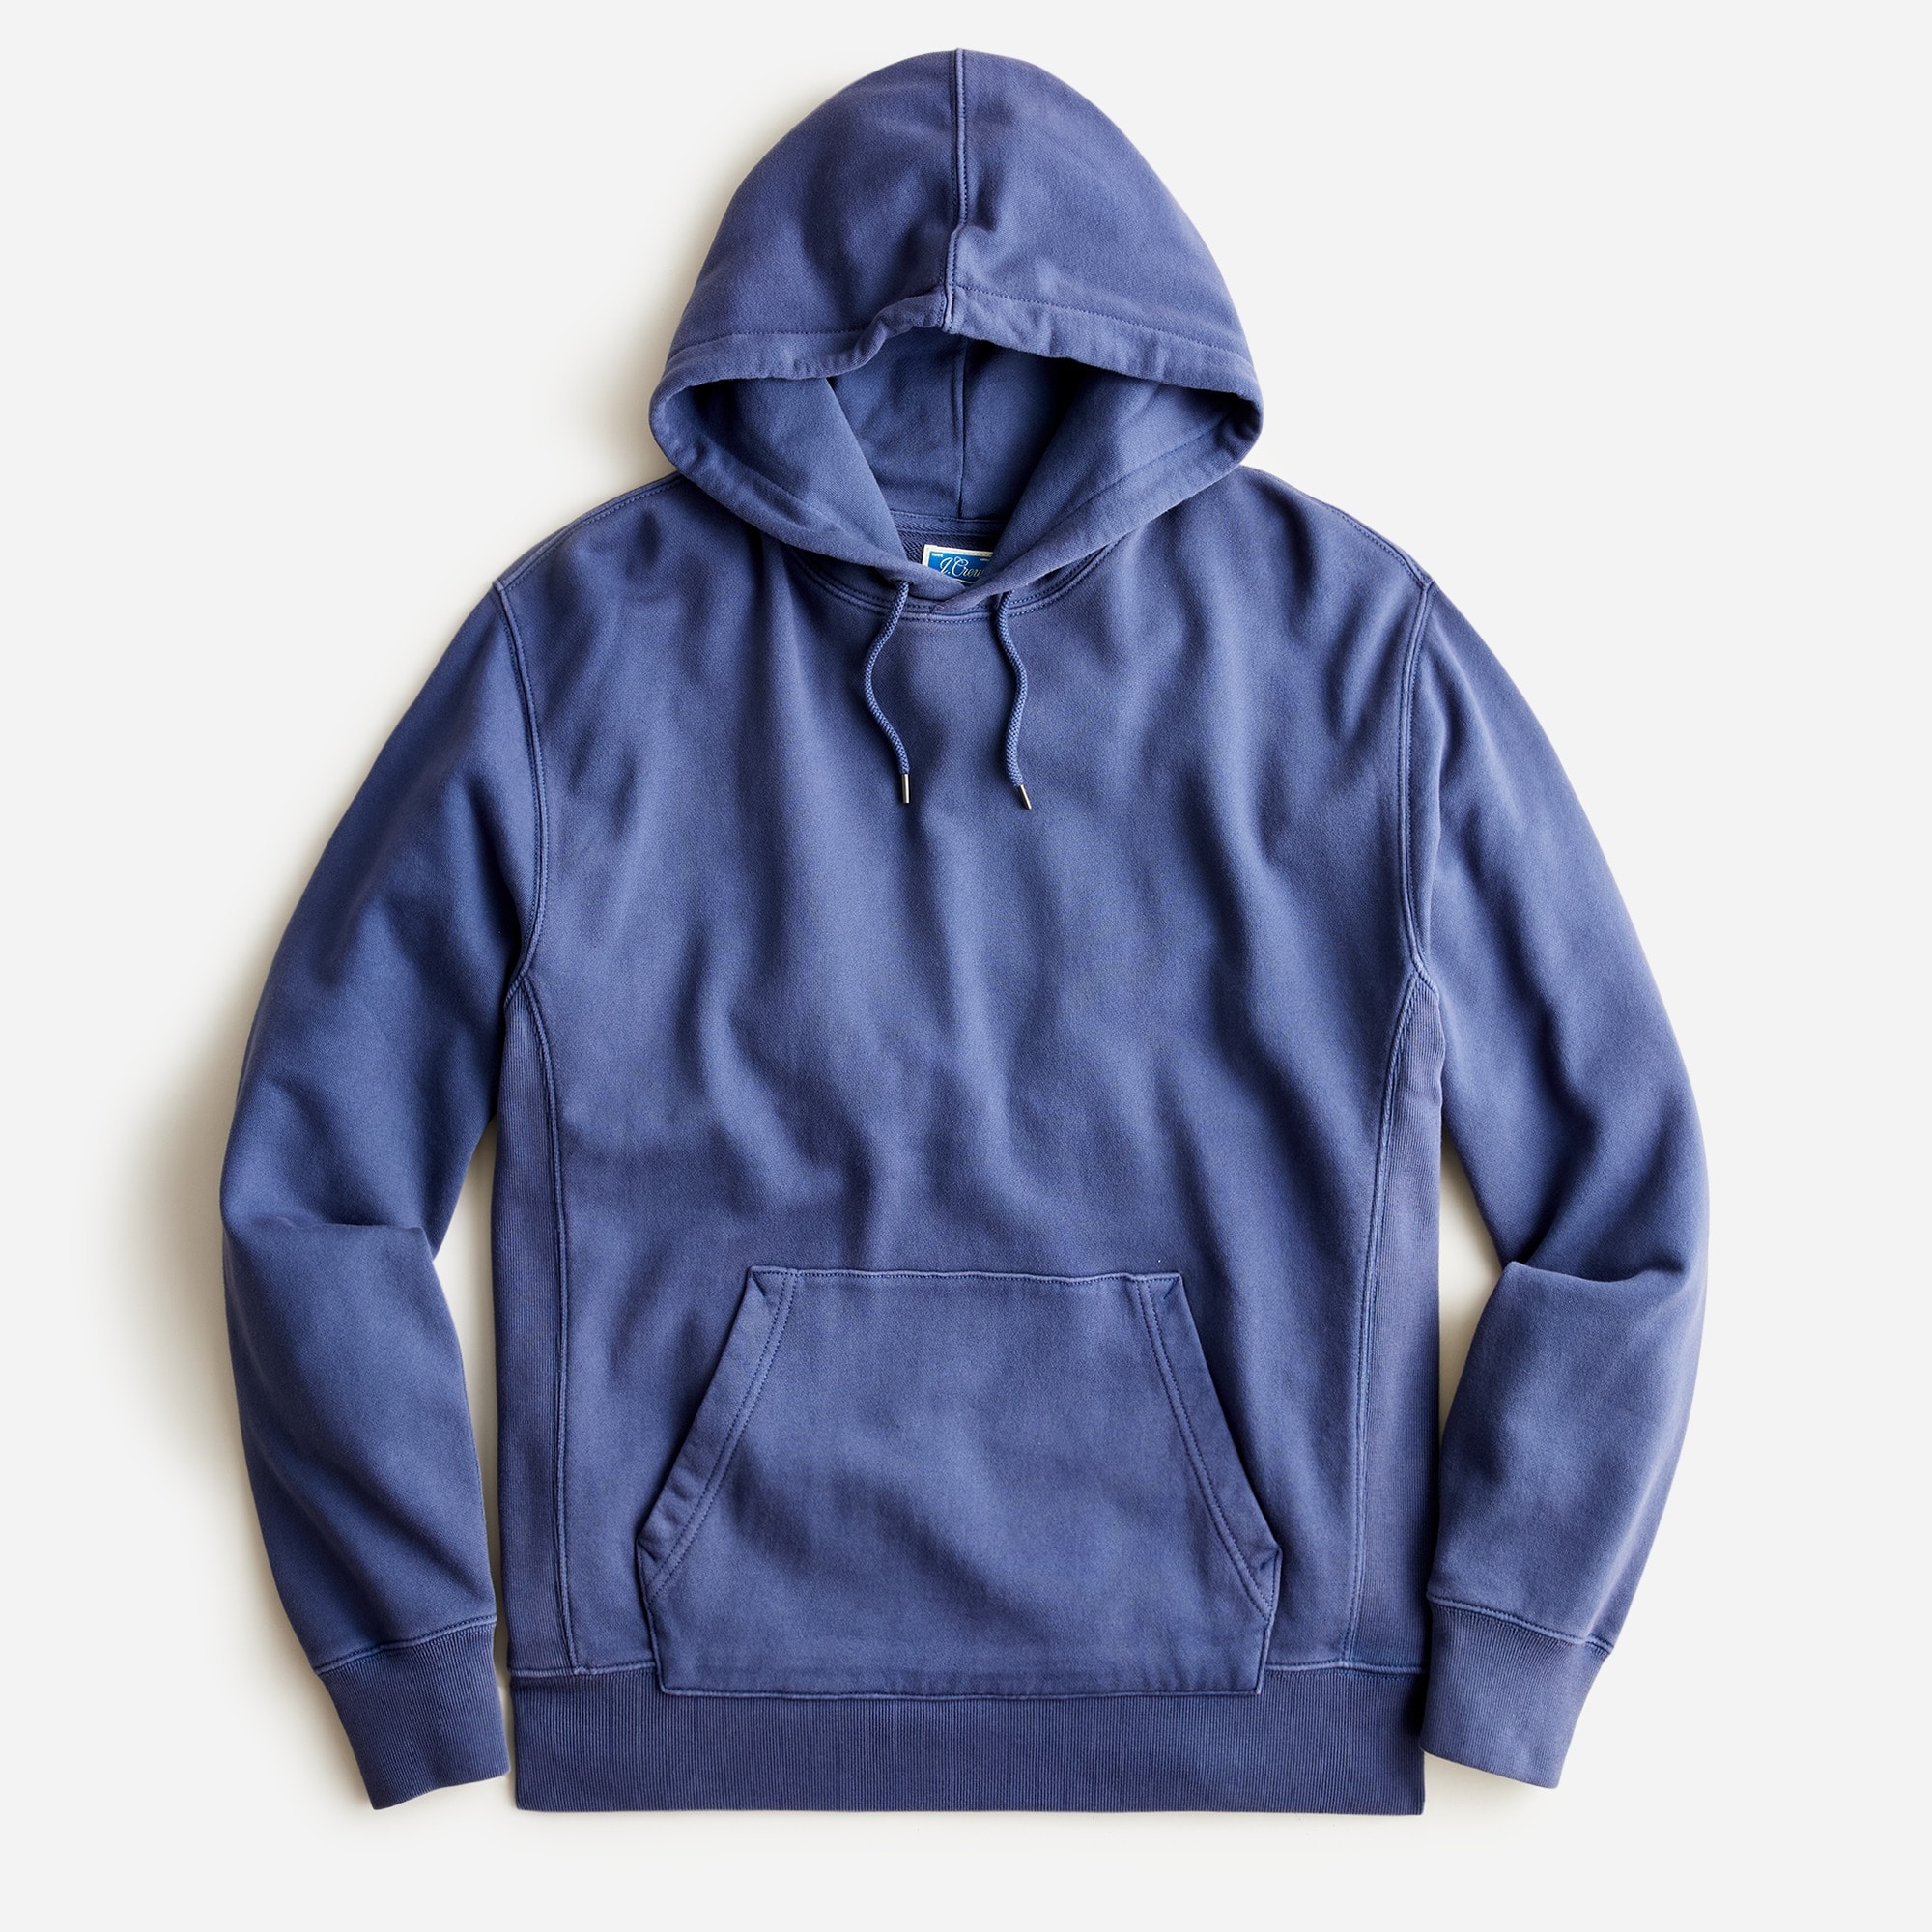 J.Crew: Garment-dyed French Terry Hoodie For Men